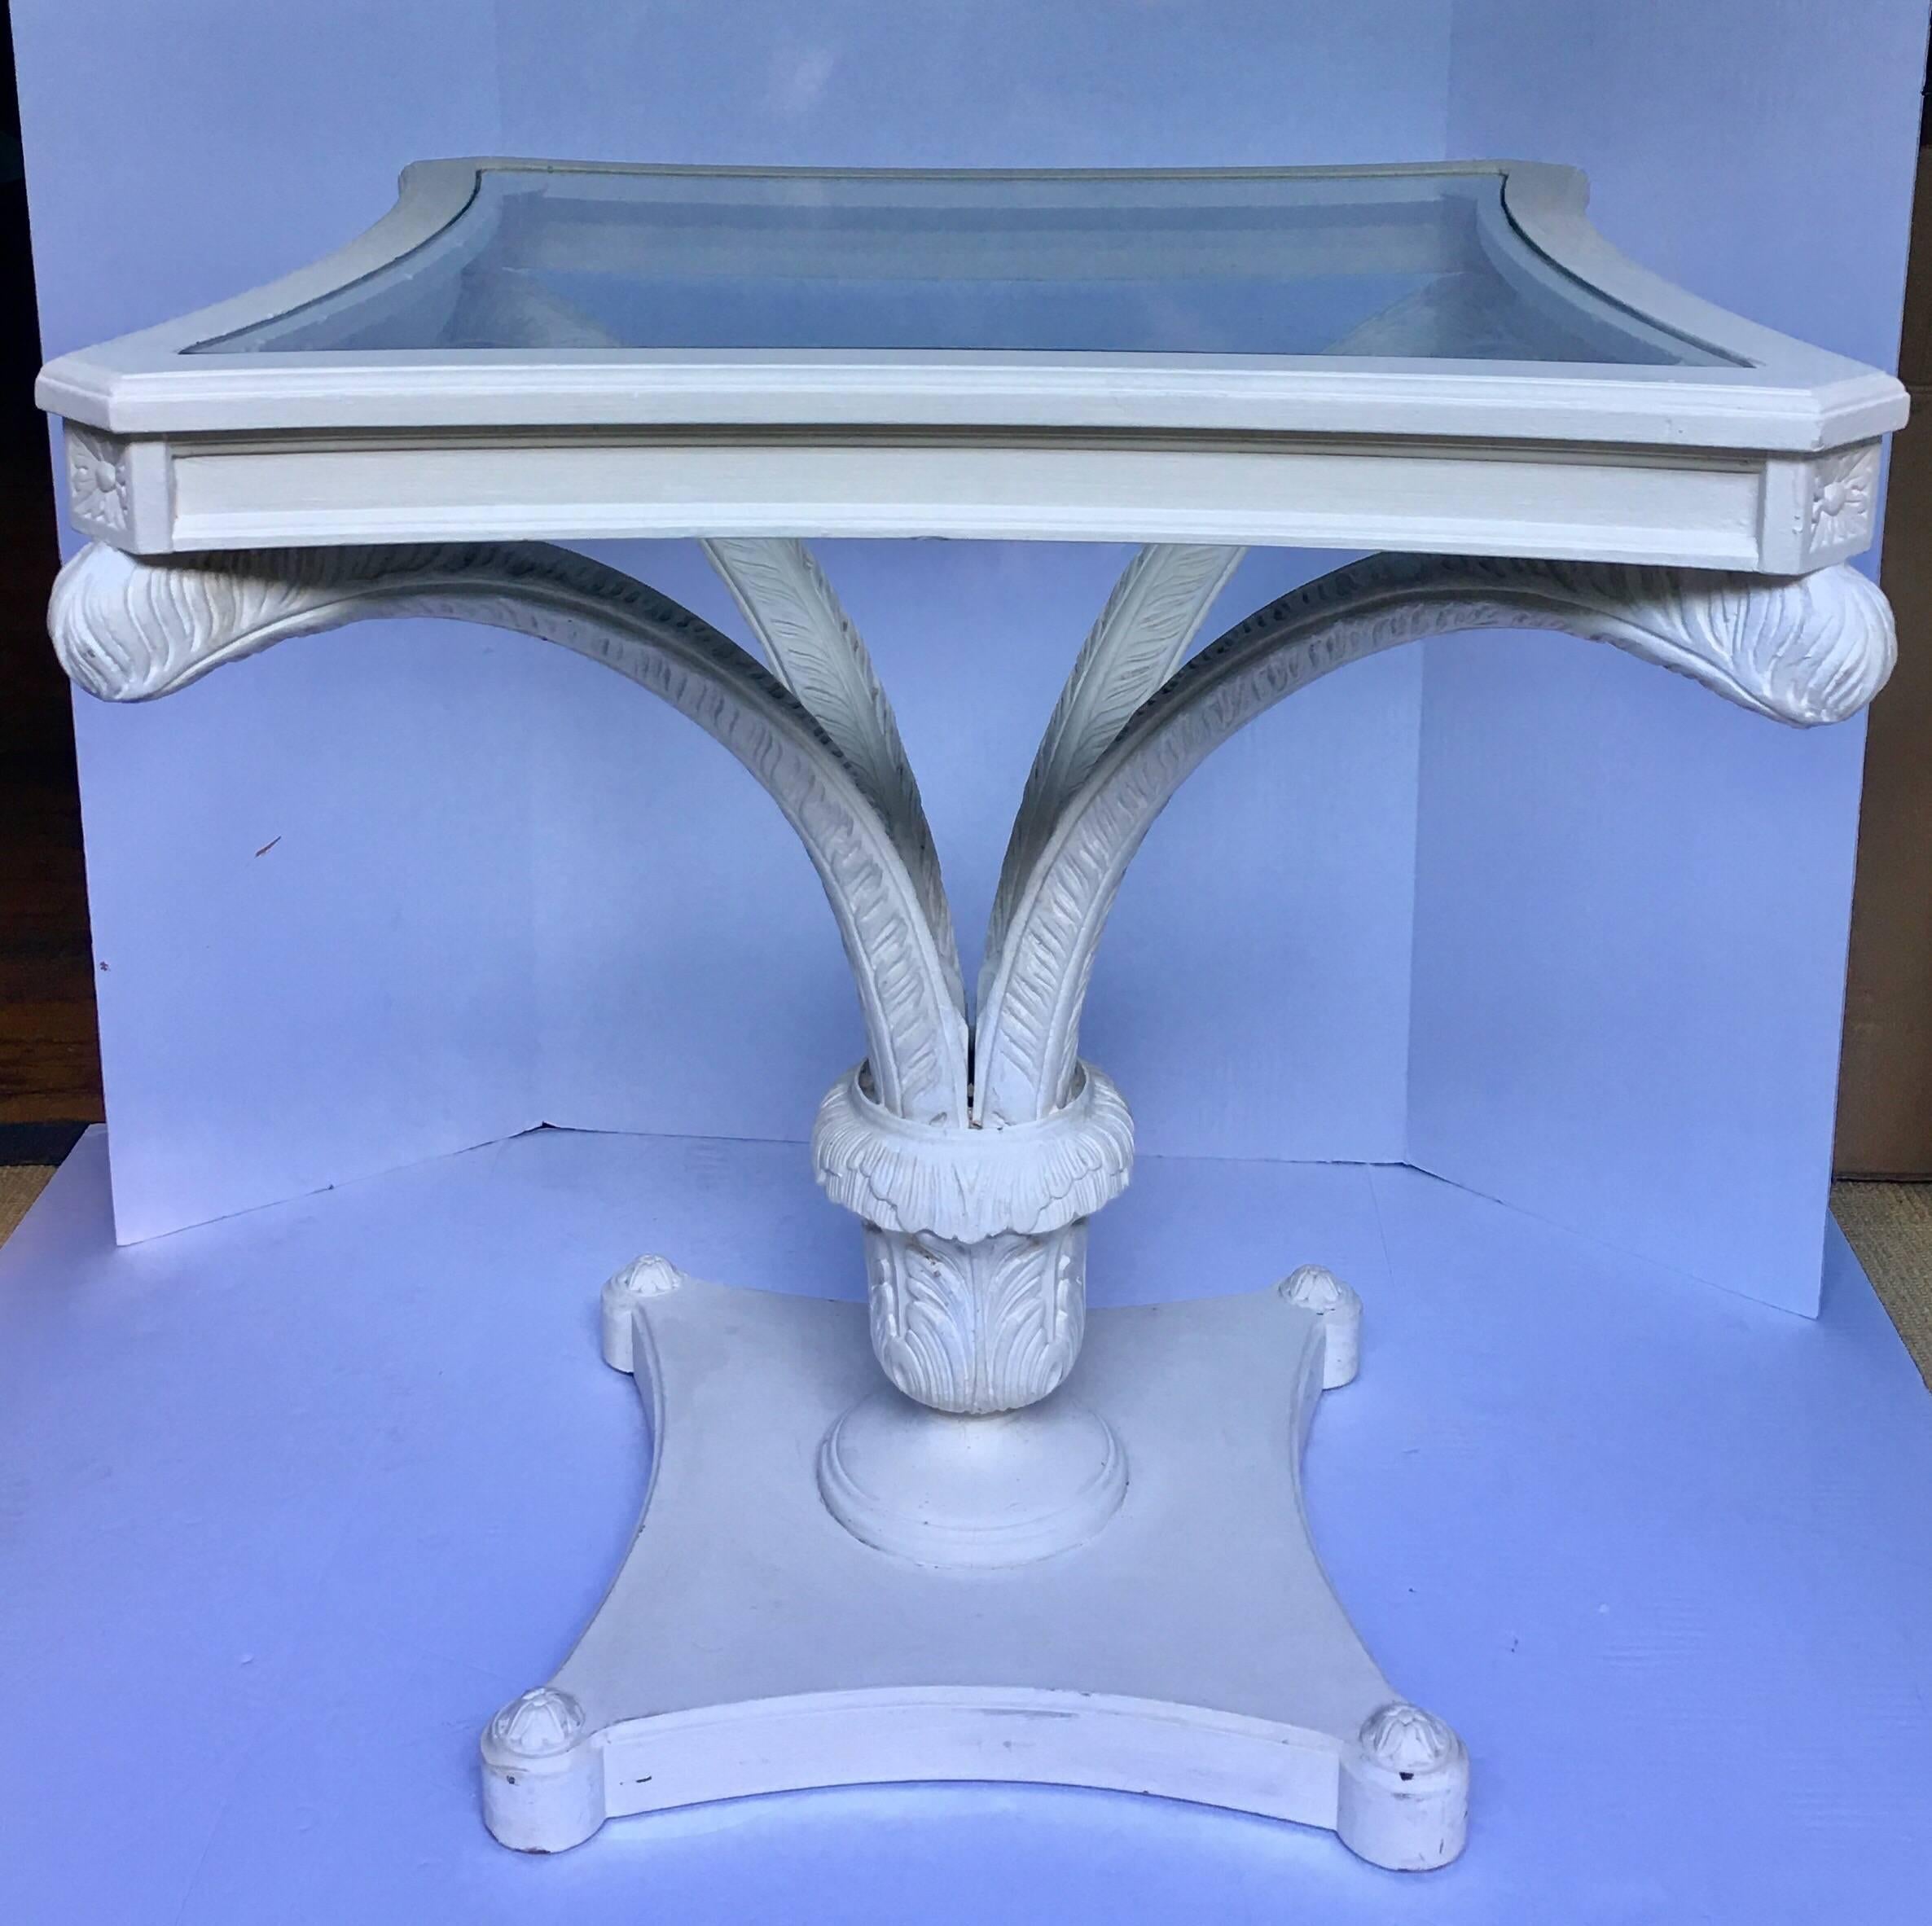 Palm Regency carved wood and glass table featuring a detailed palm leaf frond or ostrich feather motif in the style of Serge Roche. Plaster-like matte white painted finish. A very versatile piece that could be used as a centre table, side table, or